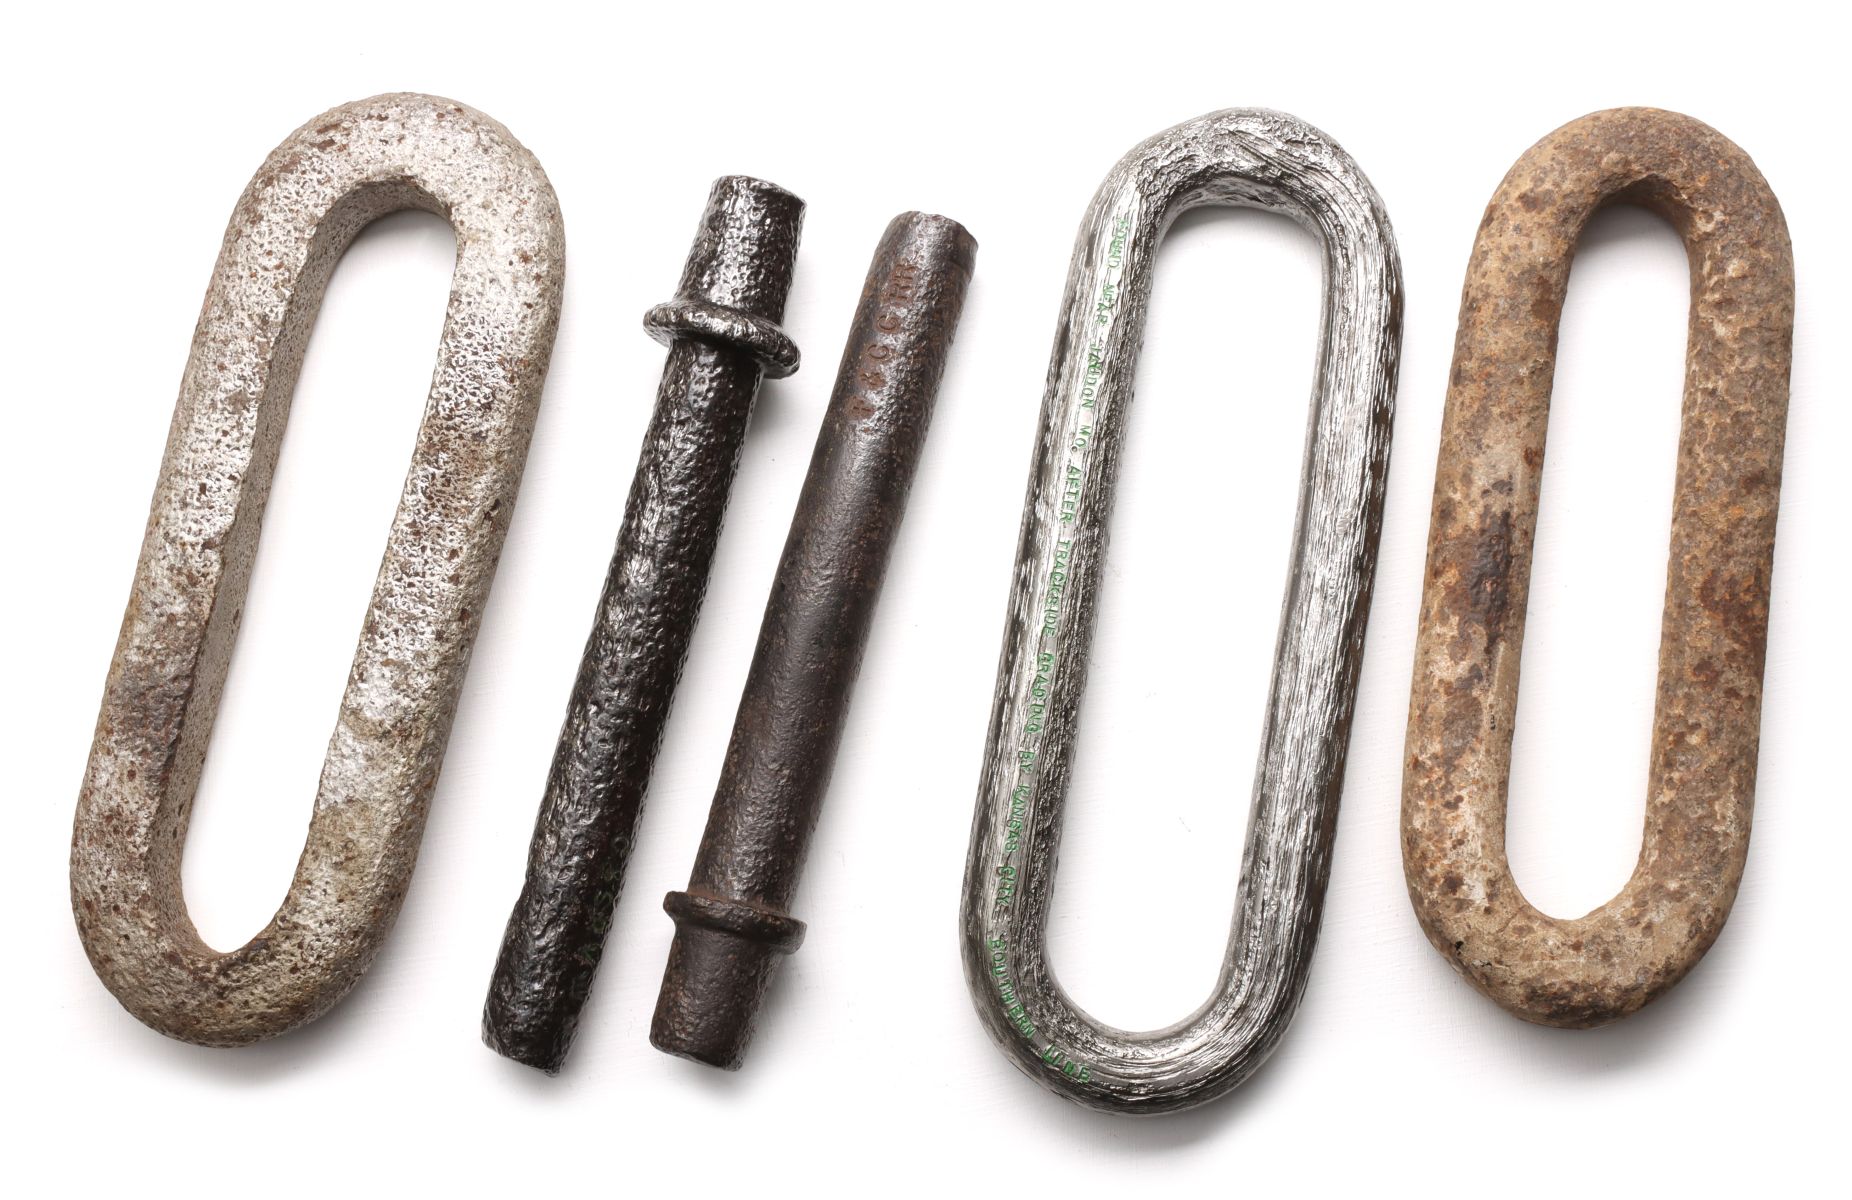 EARLY FORGED IRON LINK & PIN COLLECTION WITH PROVENANCE